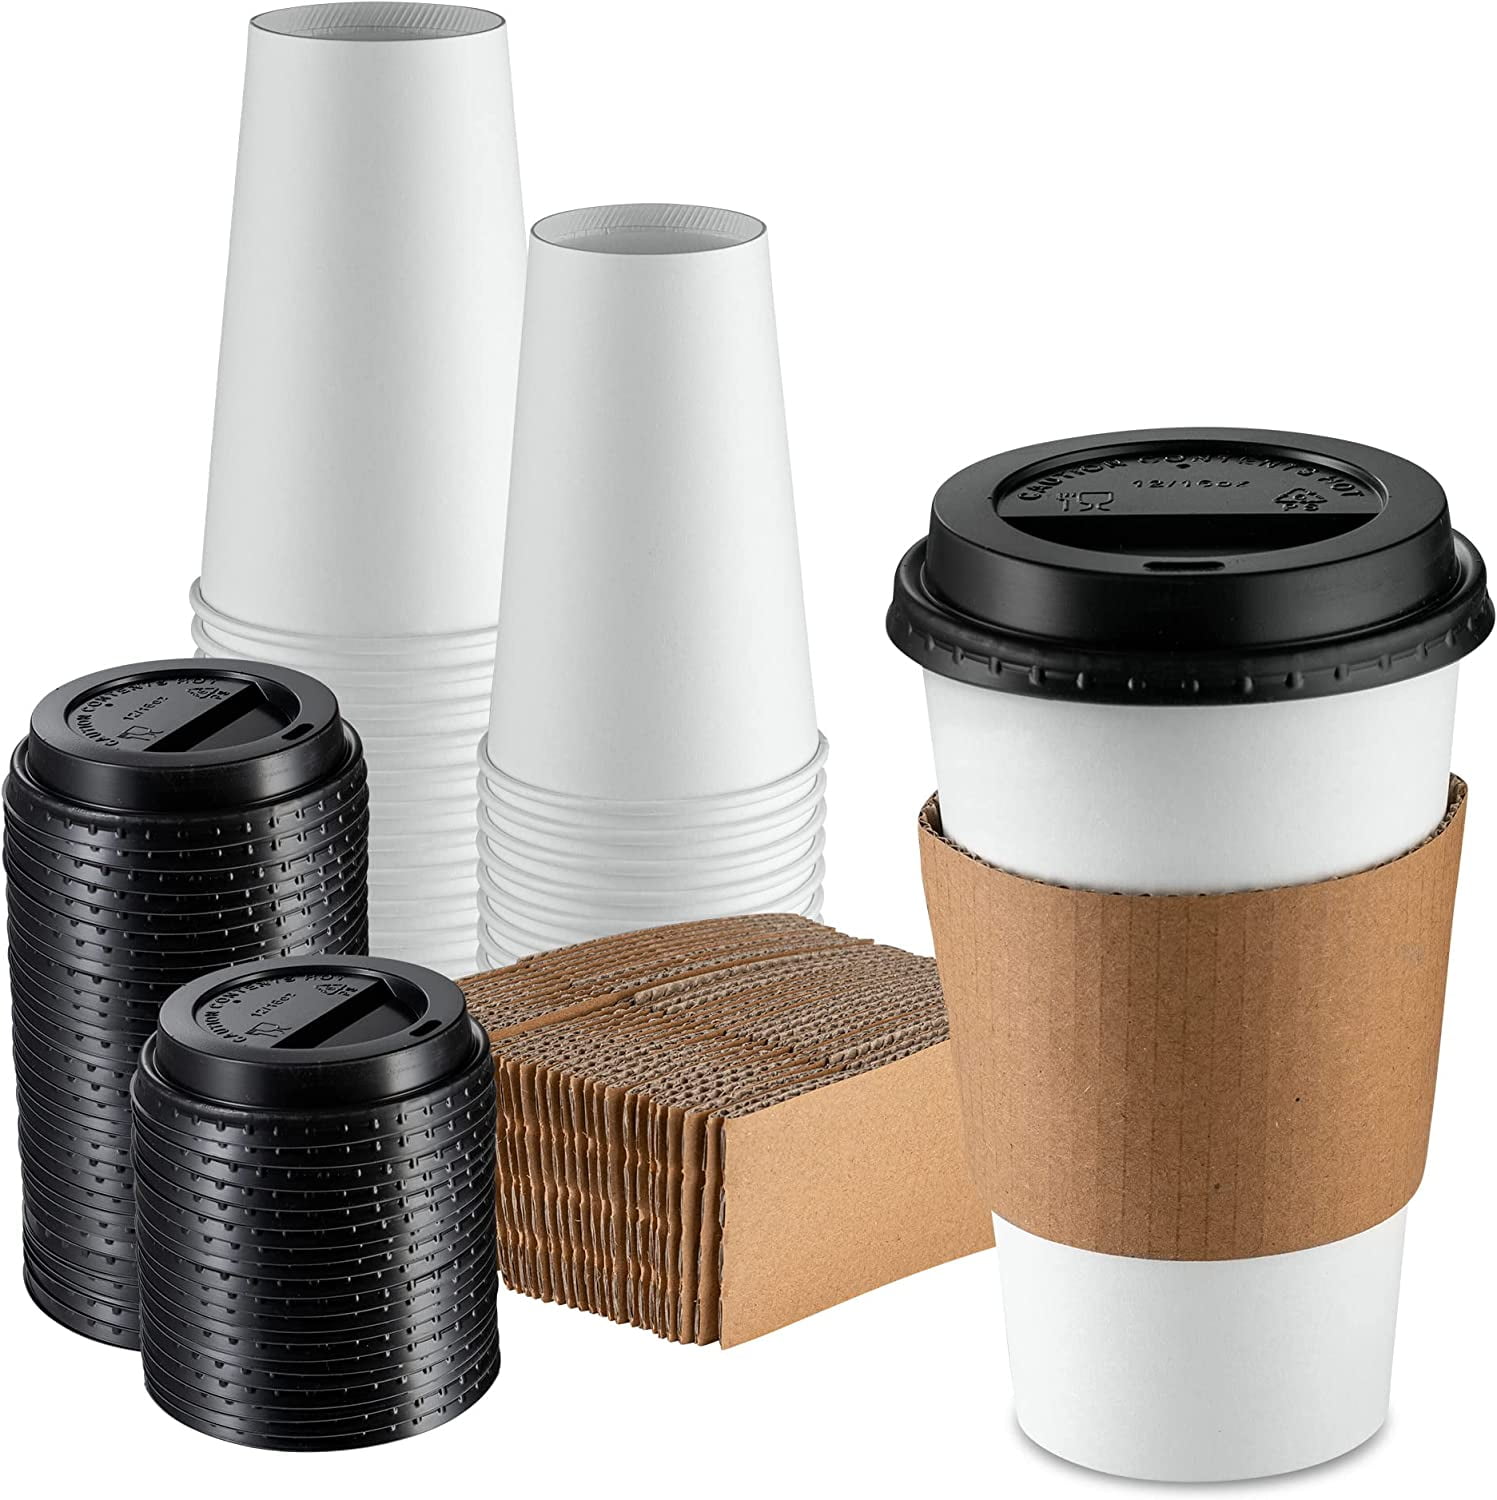 Disposable Handles Are Cookie Friendly - Yanko Design  Disposable coffee  cups, Disposable cups design, Coffee cups